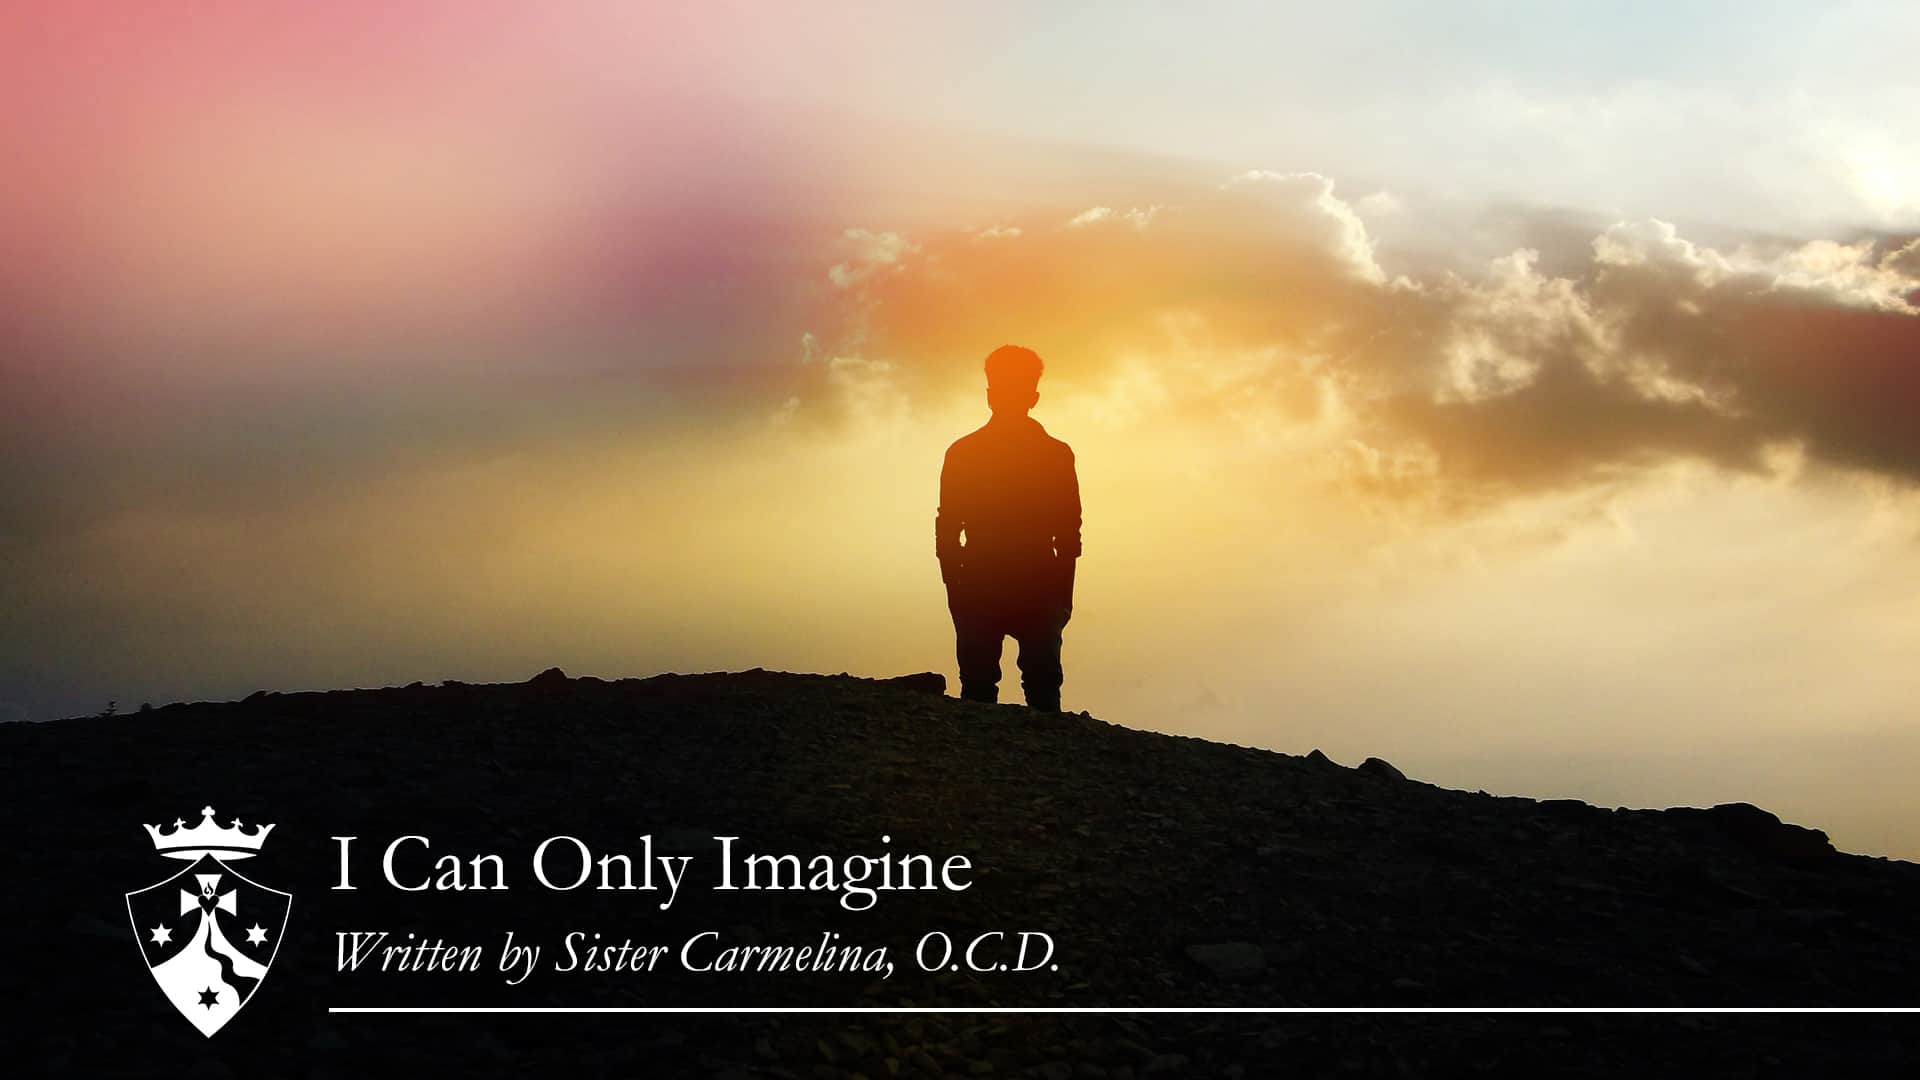 Silhouette of man standing on mountain looking at sky, 'I Can Only Imagine, Written by Sister Carmelina, O.C.D.'